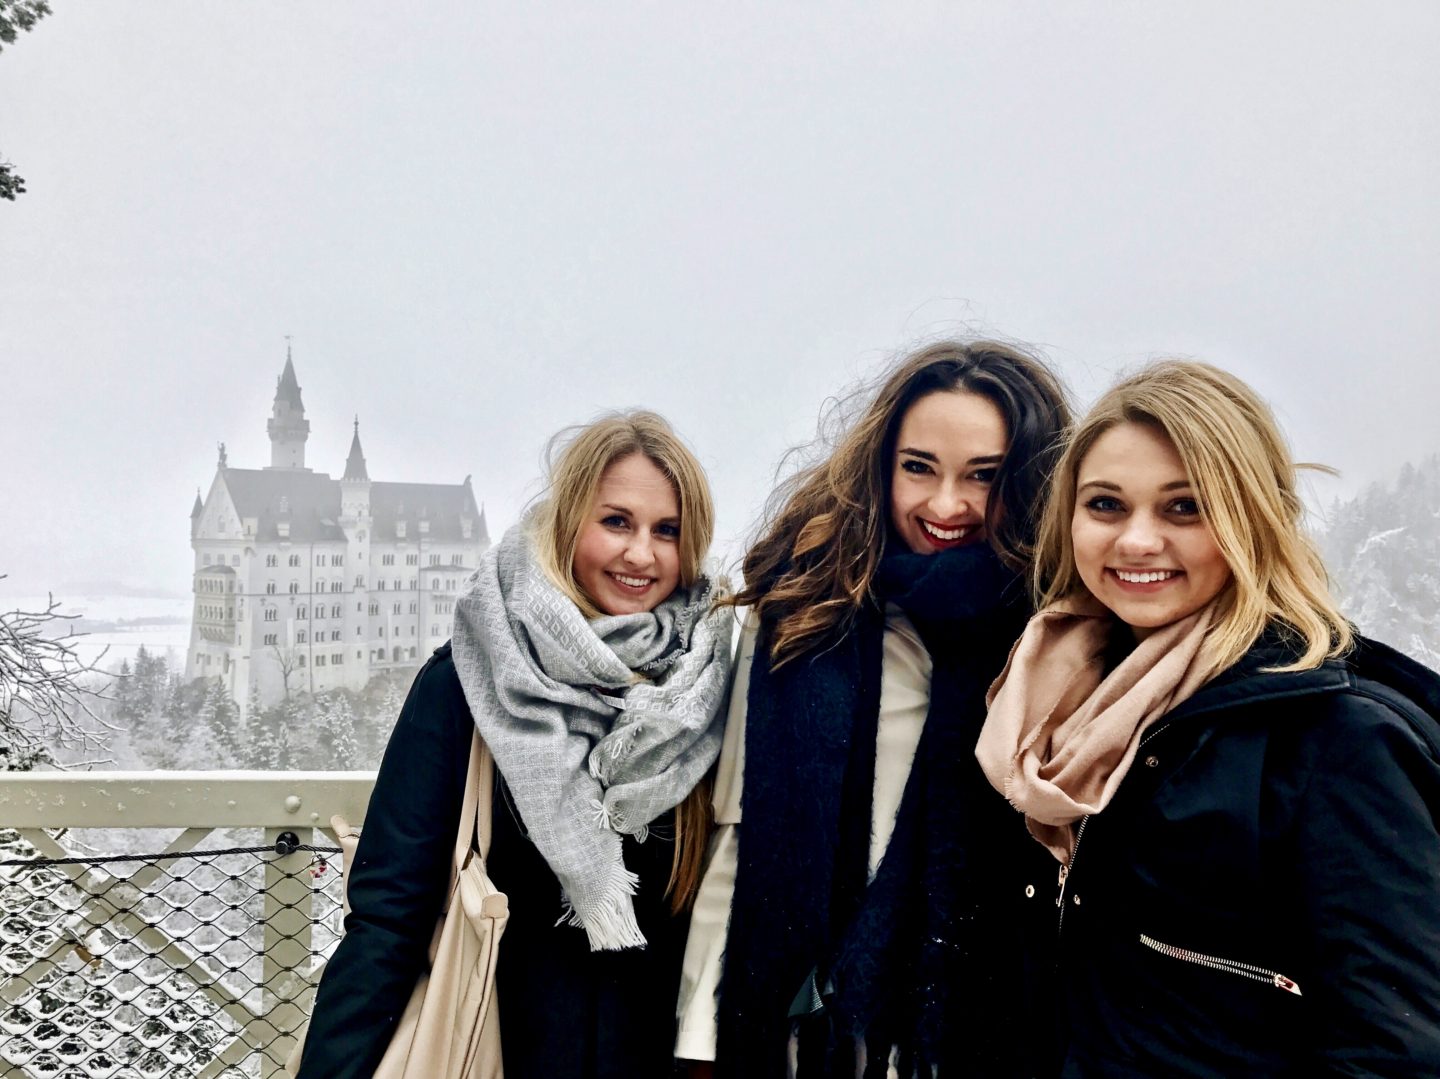 Neuschwanstein: Once upon a time, Cinderella, Belle, and Elsa walked into a Bavarian Castle